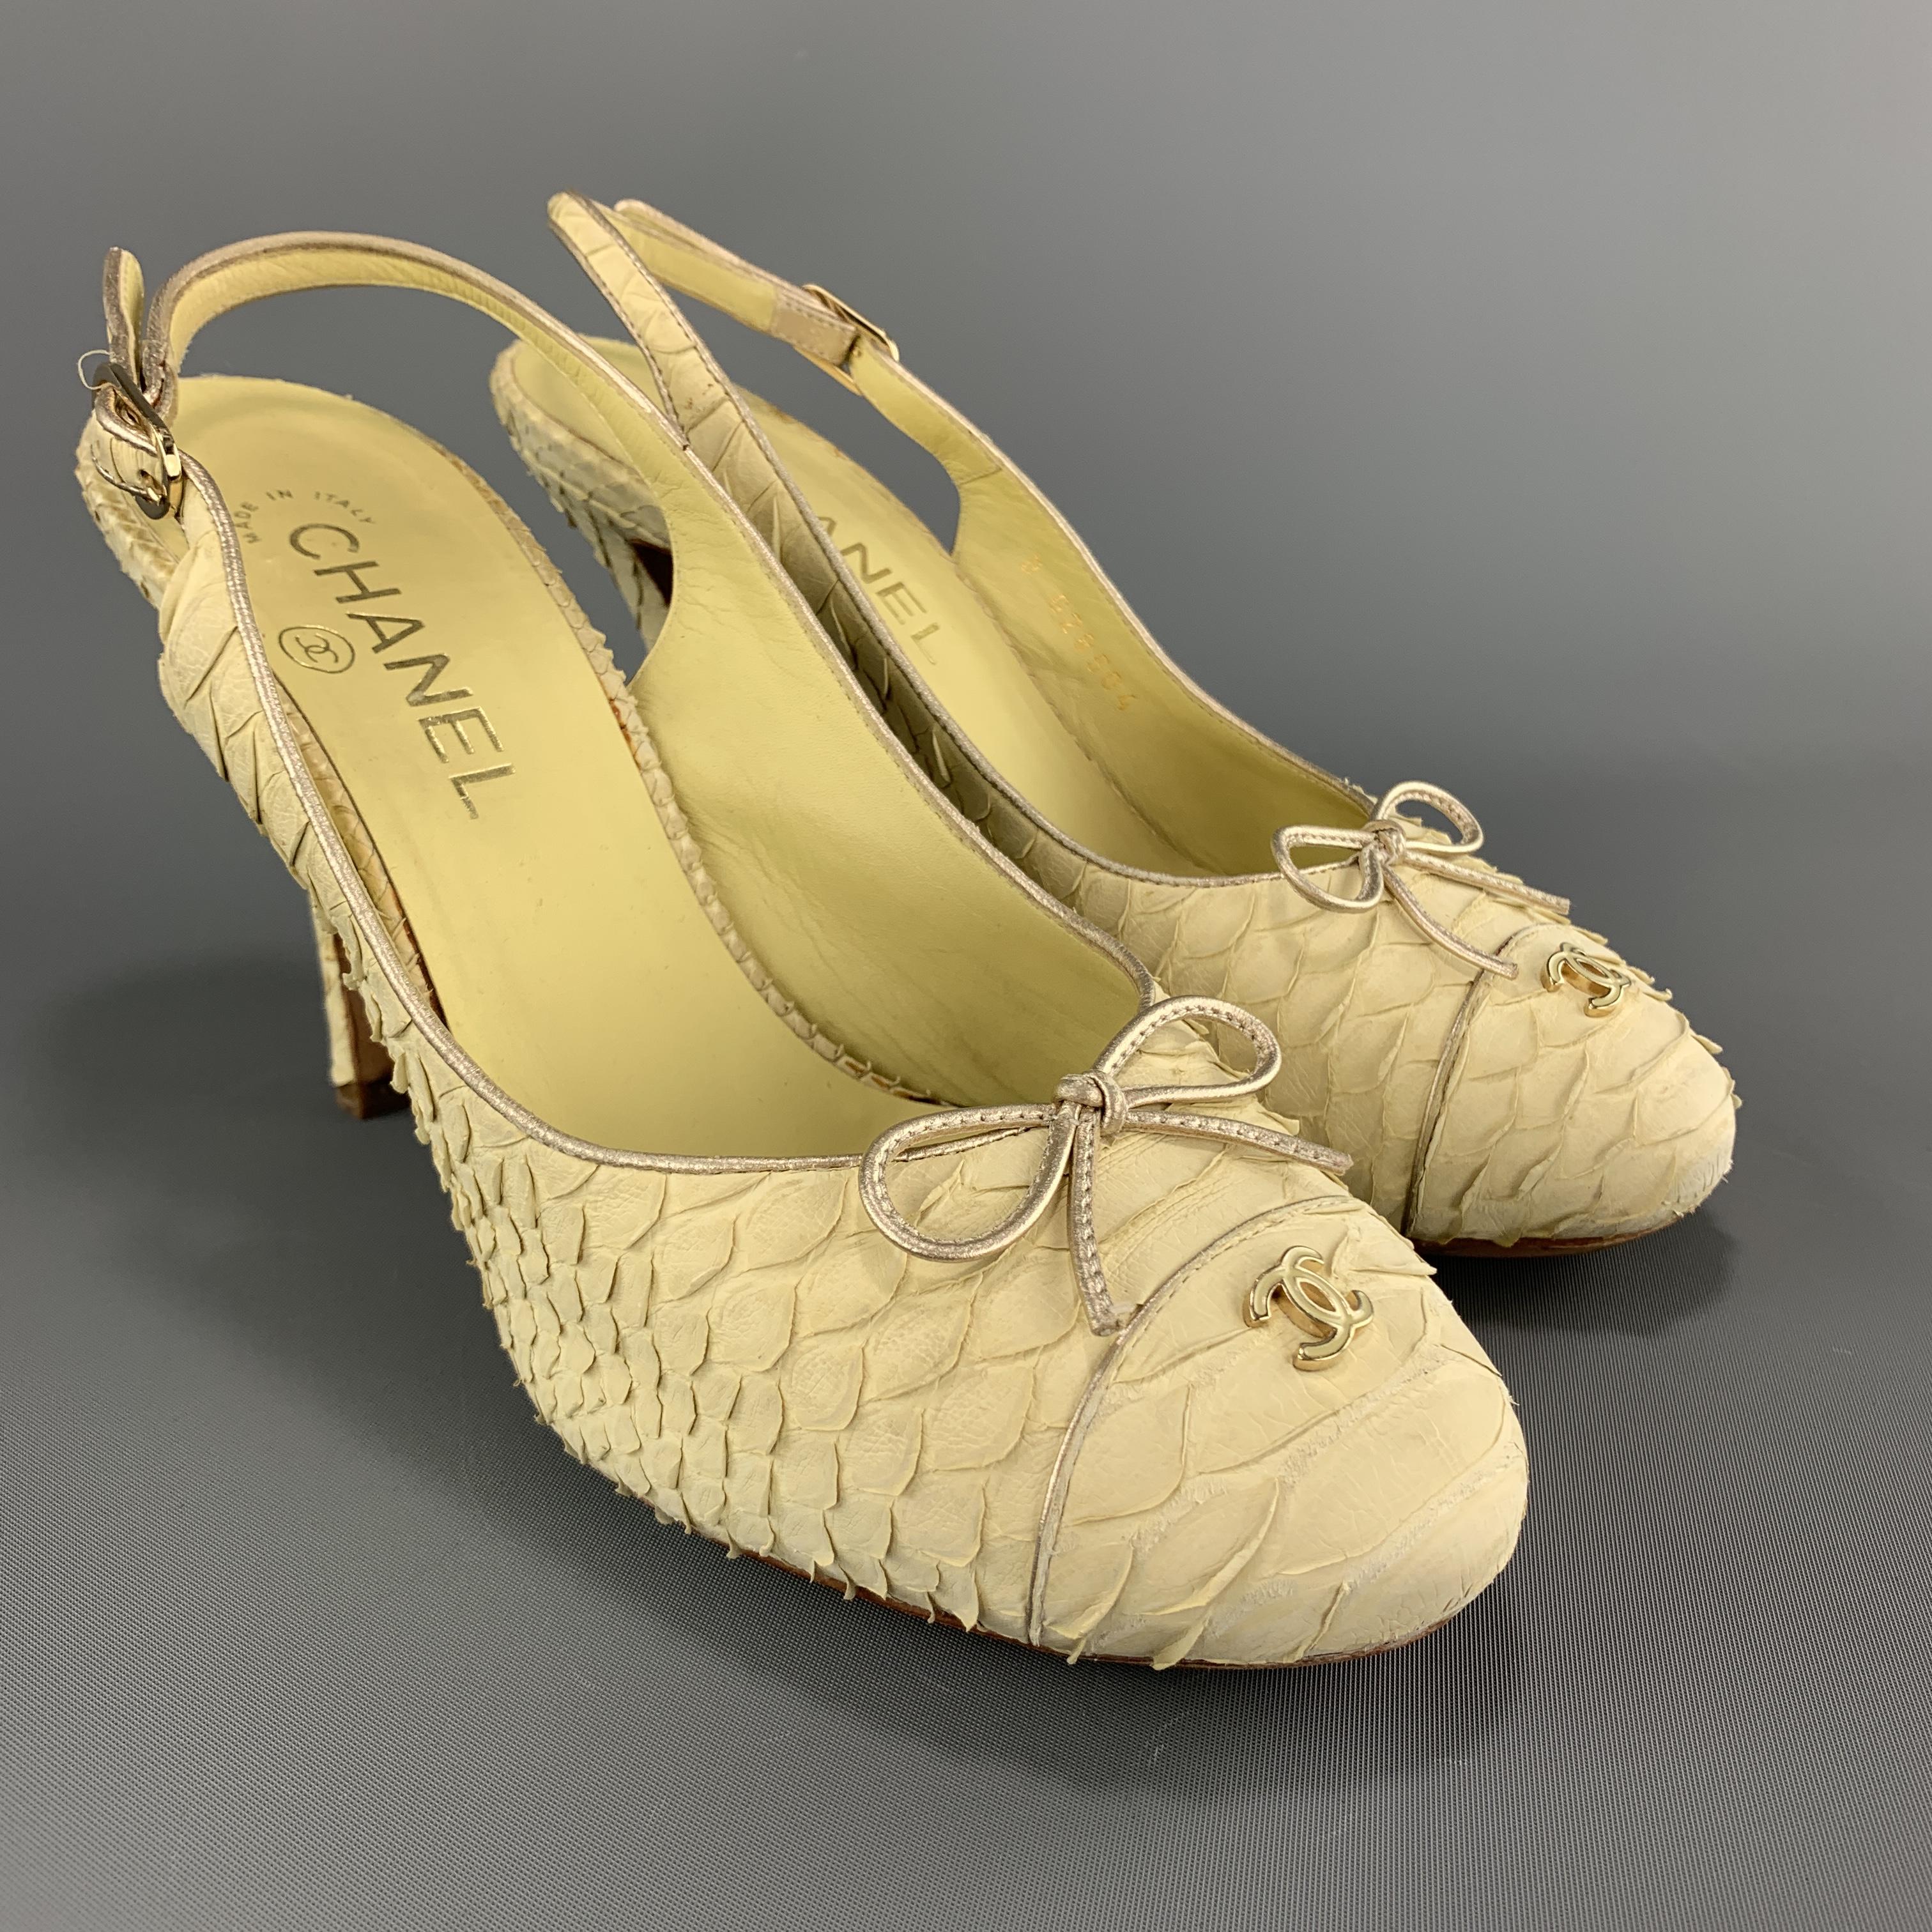 CHANEL pumps come in pastel yellow matte snakeskin with a sling back, metallic gold leather trim, bow, and tow cap with enamel CC. Made in Italy.

Excellent Pre-Owned Condition.
Marked: IT 8.5

Measurements:

Heel: 4.25 in.
Platform: 0.75 in.